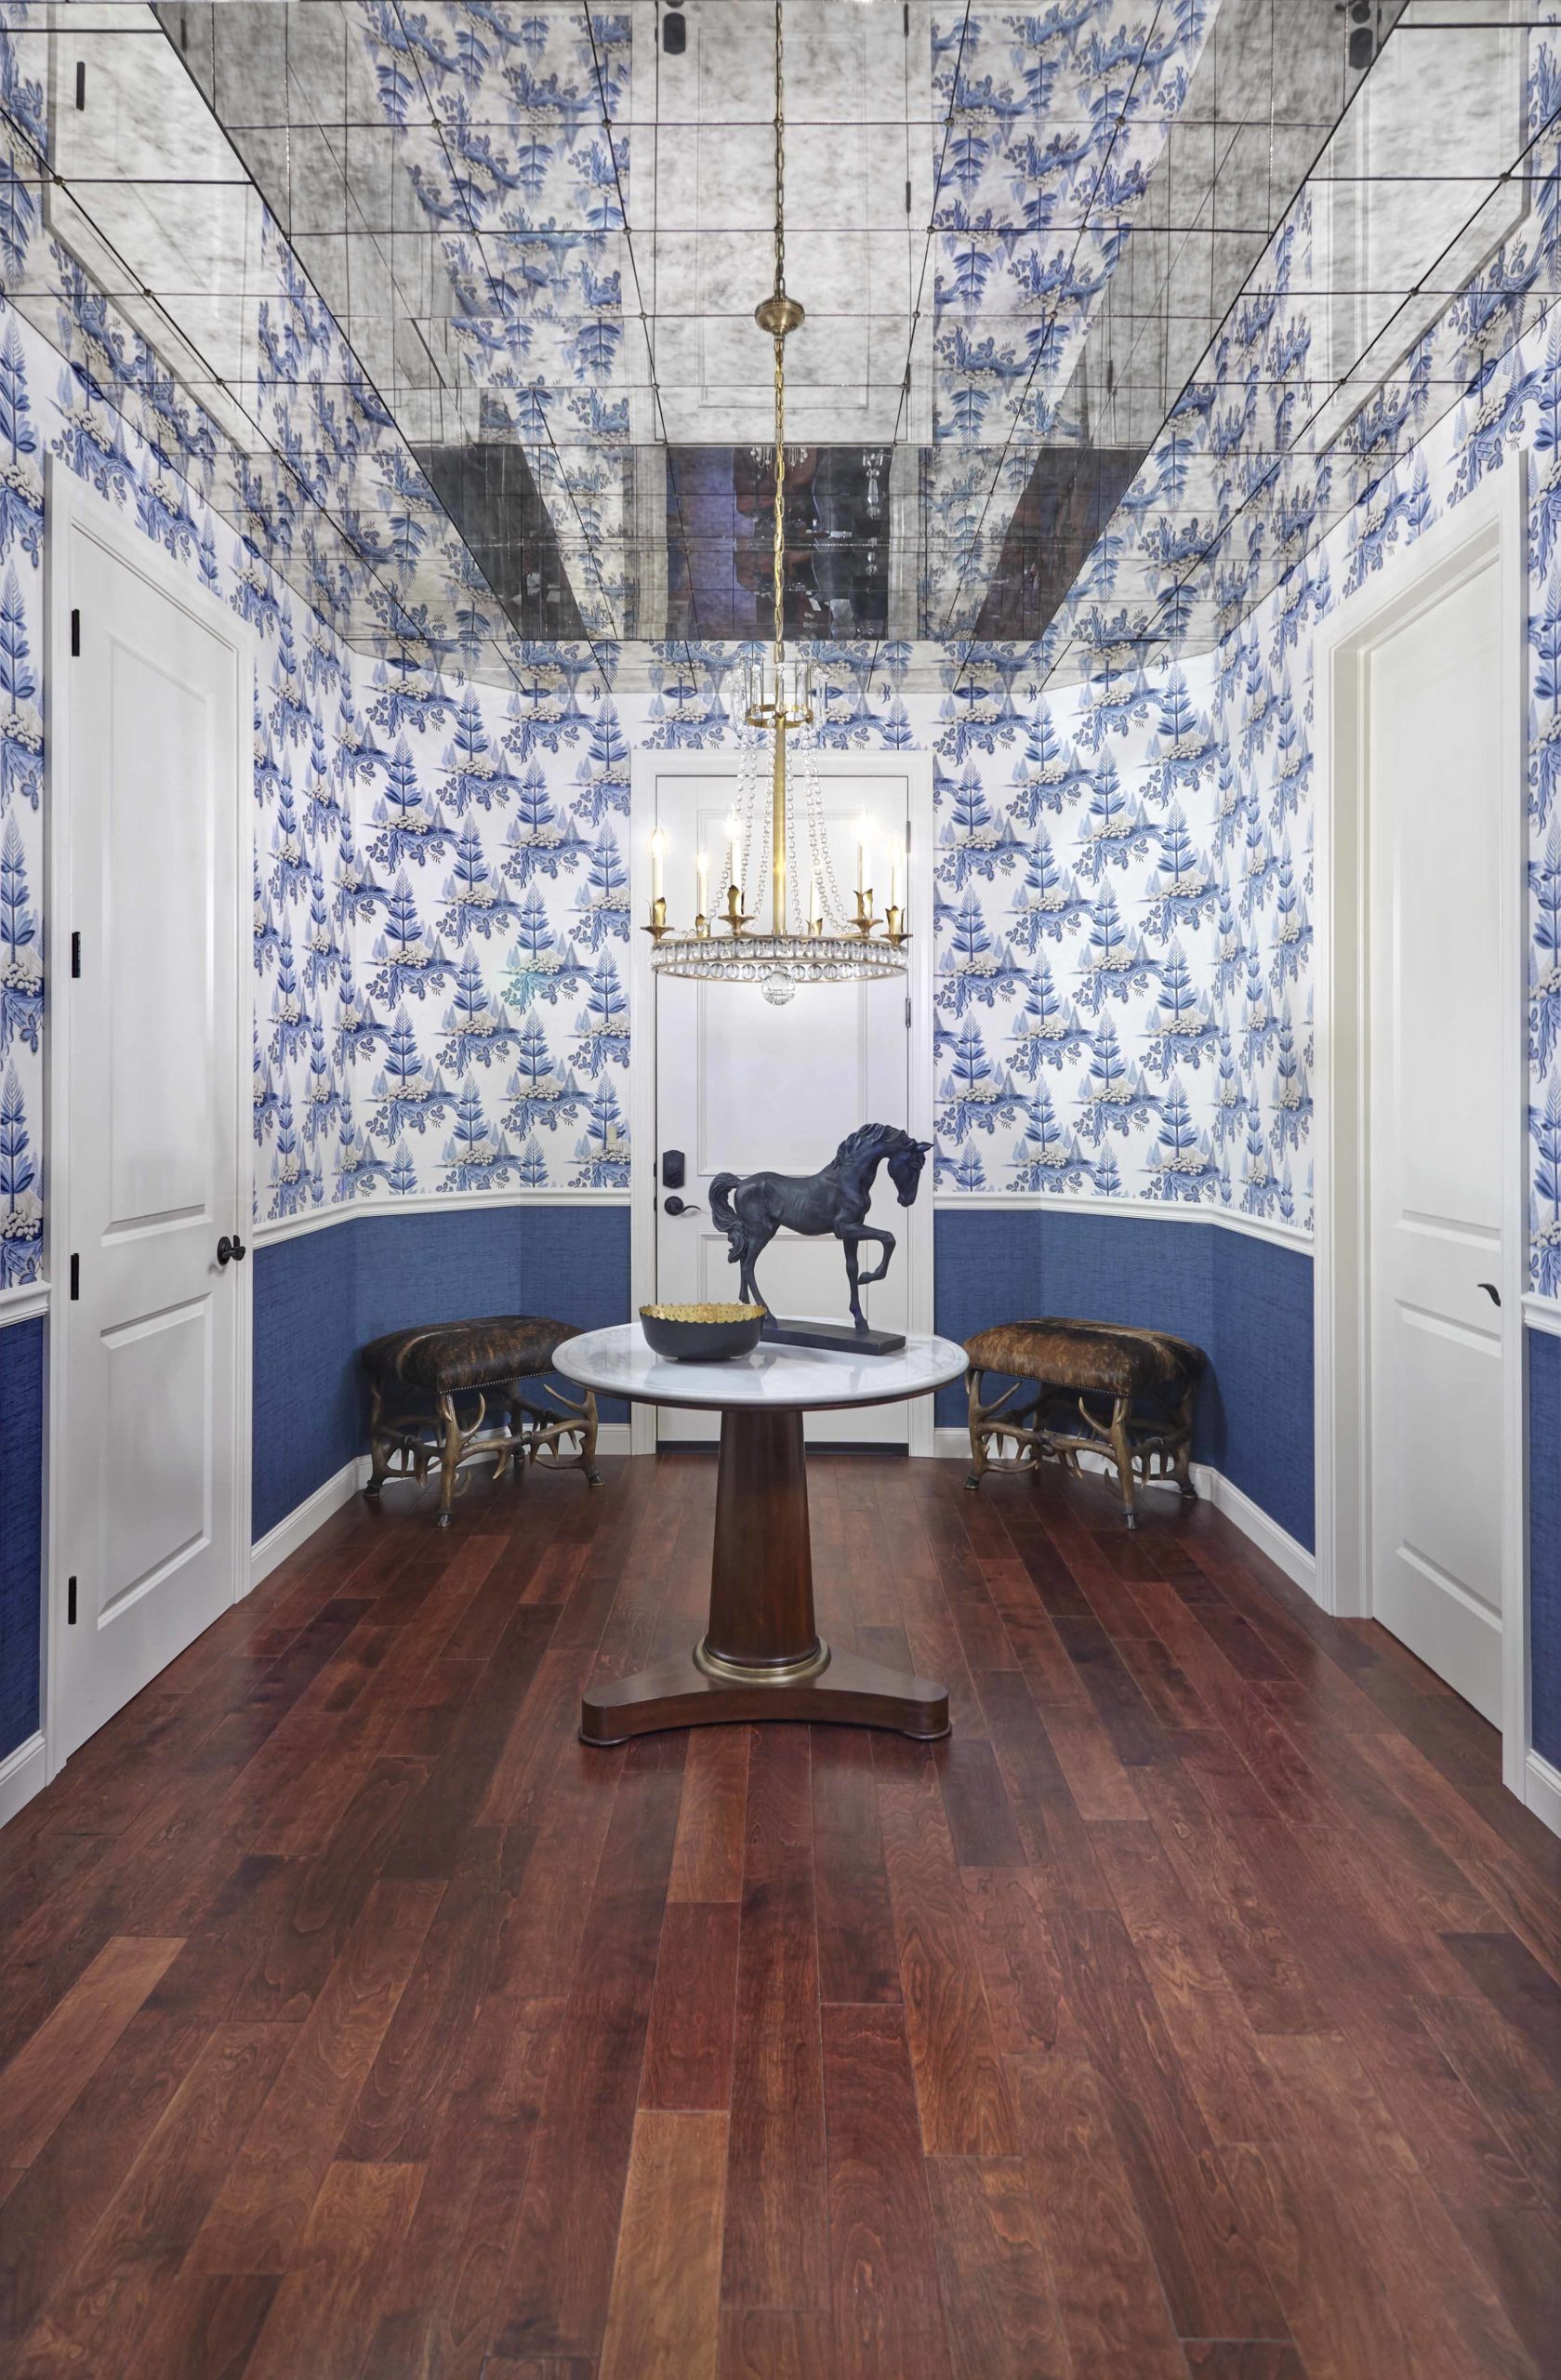 Hallway with blue and white wallpaper on walls, dark wooden floors and a circle console table in the middle